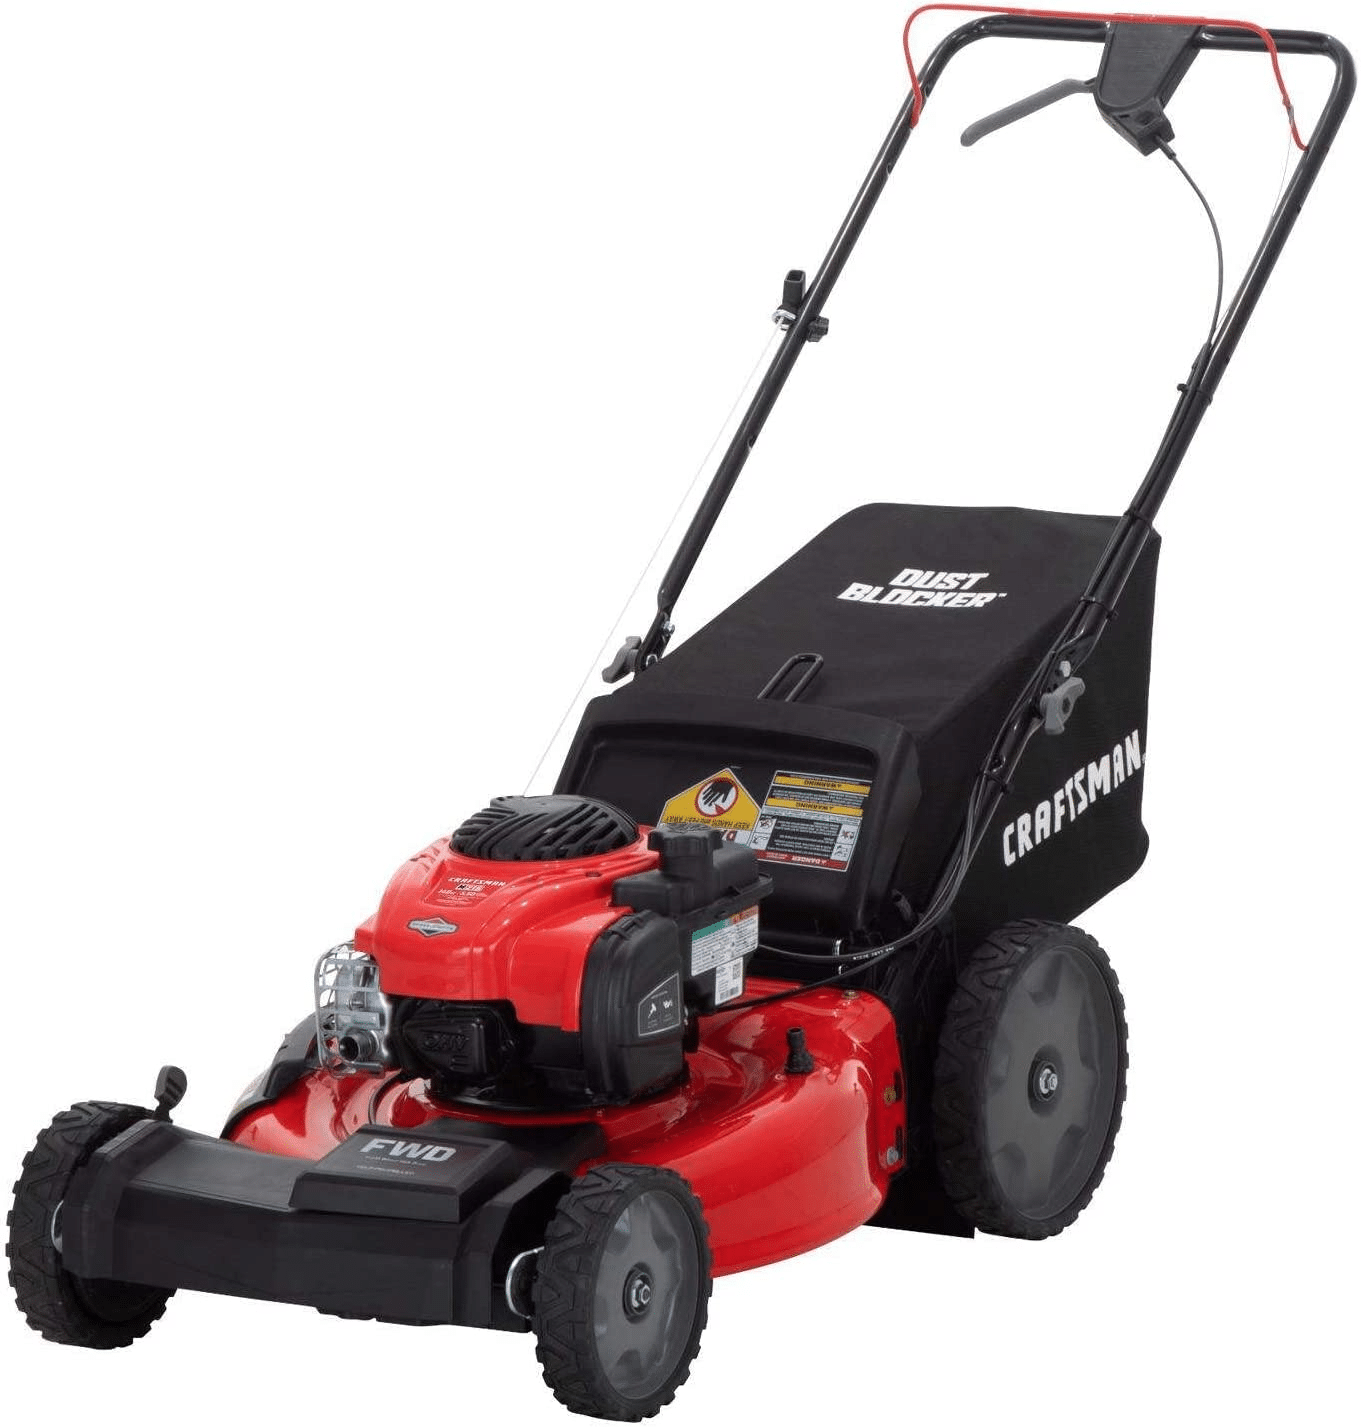 Craftsmand self propelled budget lawn mower for hills